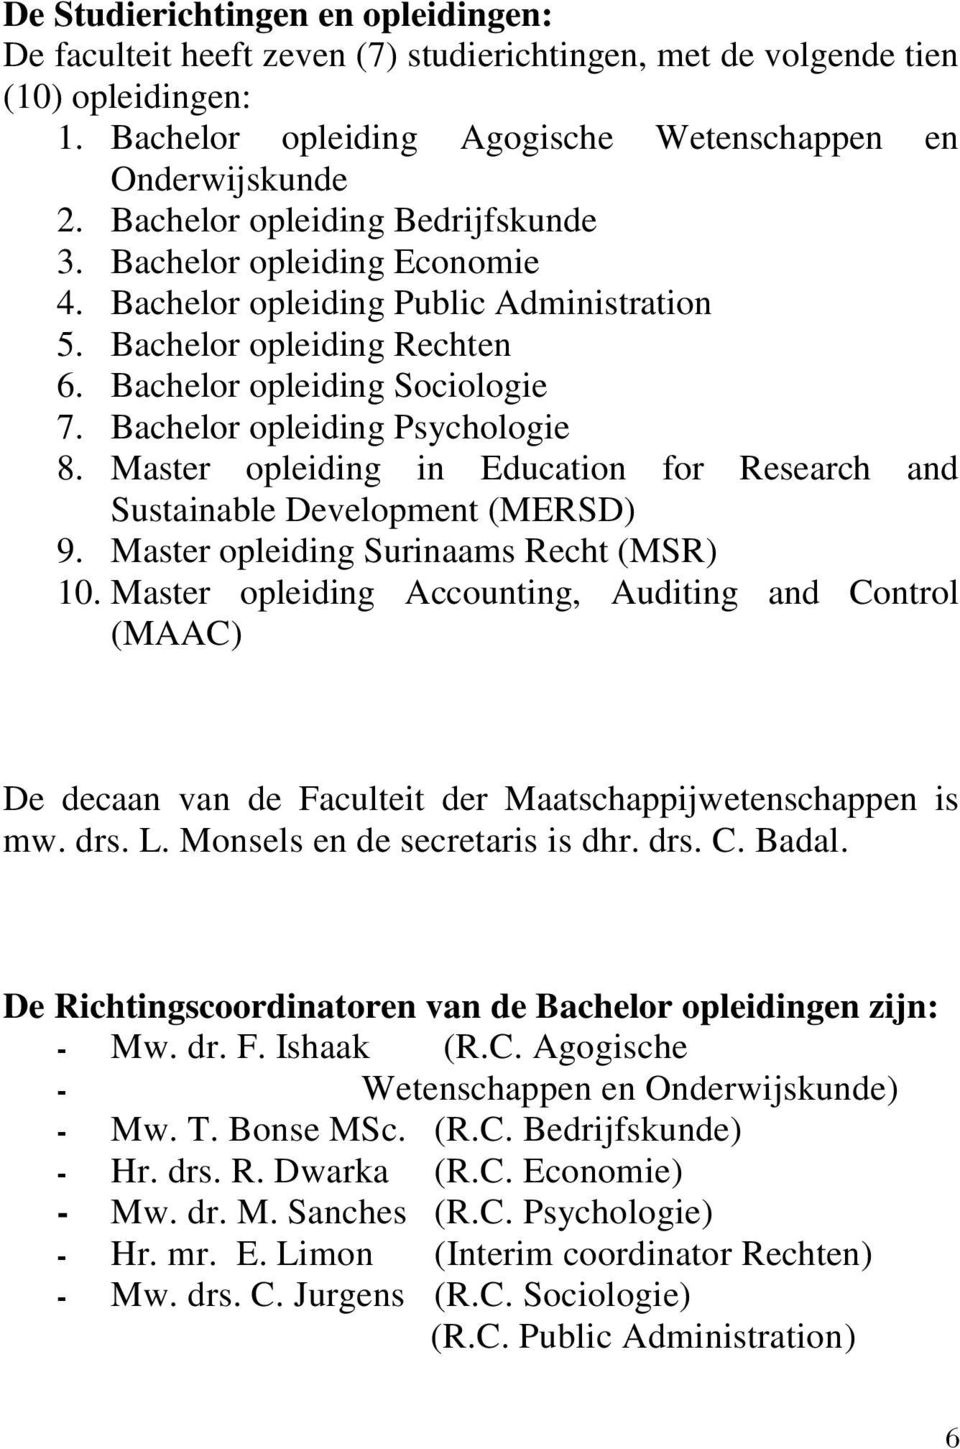 Bachelor opleiding Psychologie 8. Master opleiding in Education for Research and Sustainable Development (MERSD) 9. Master opleiding Surinaams Recht (MSR) 10.